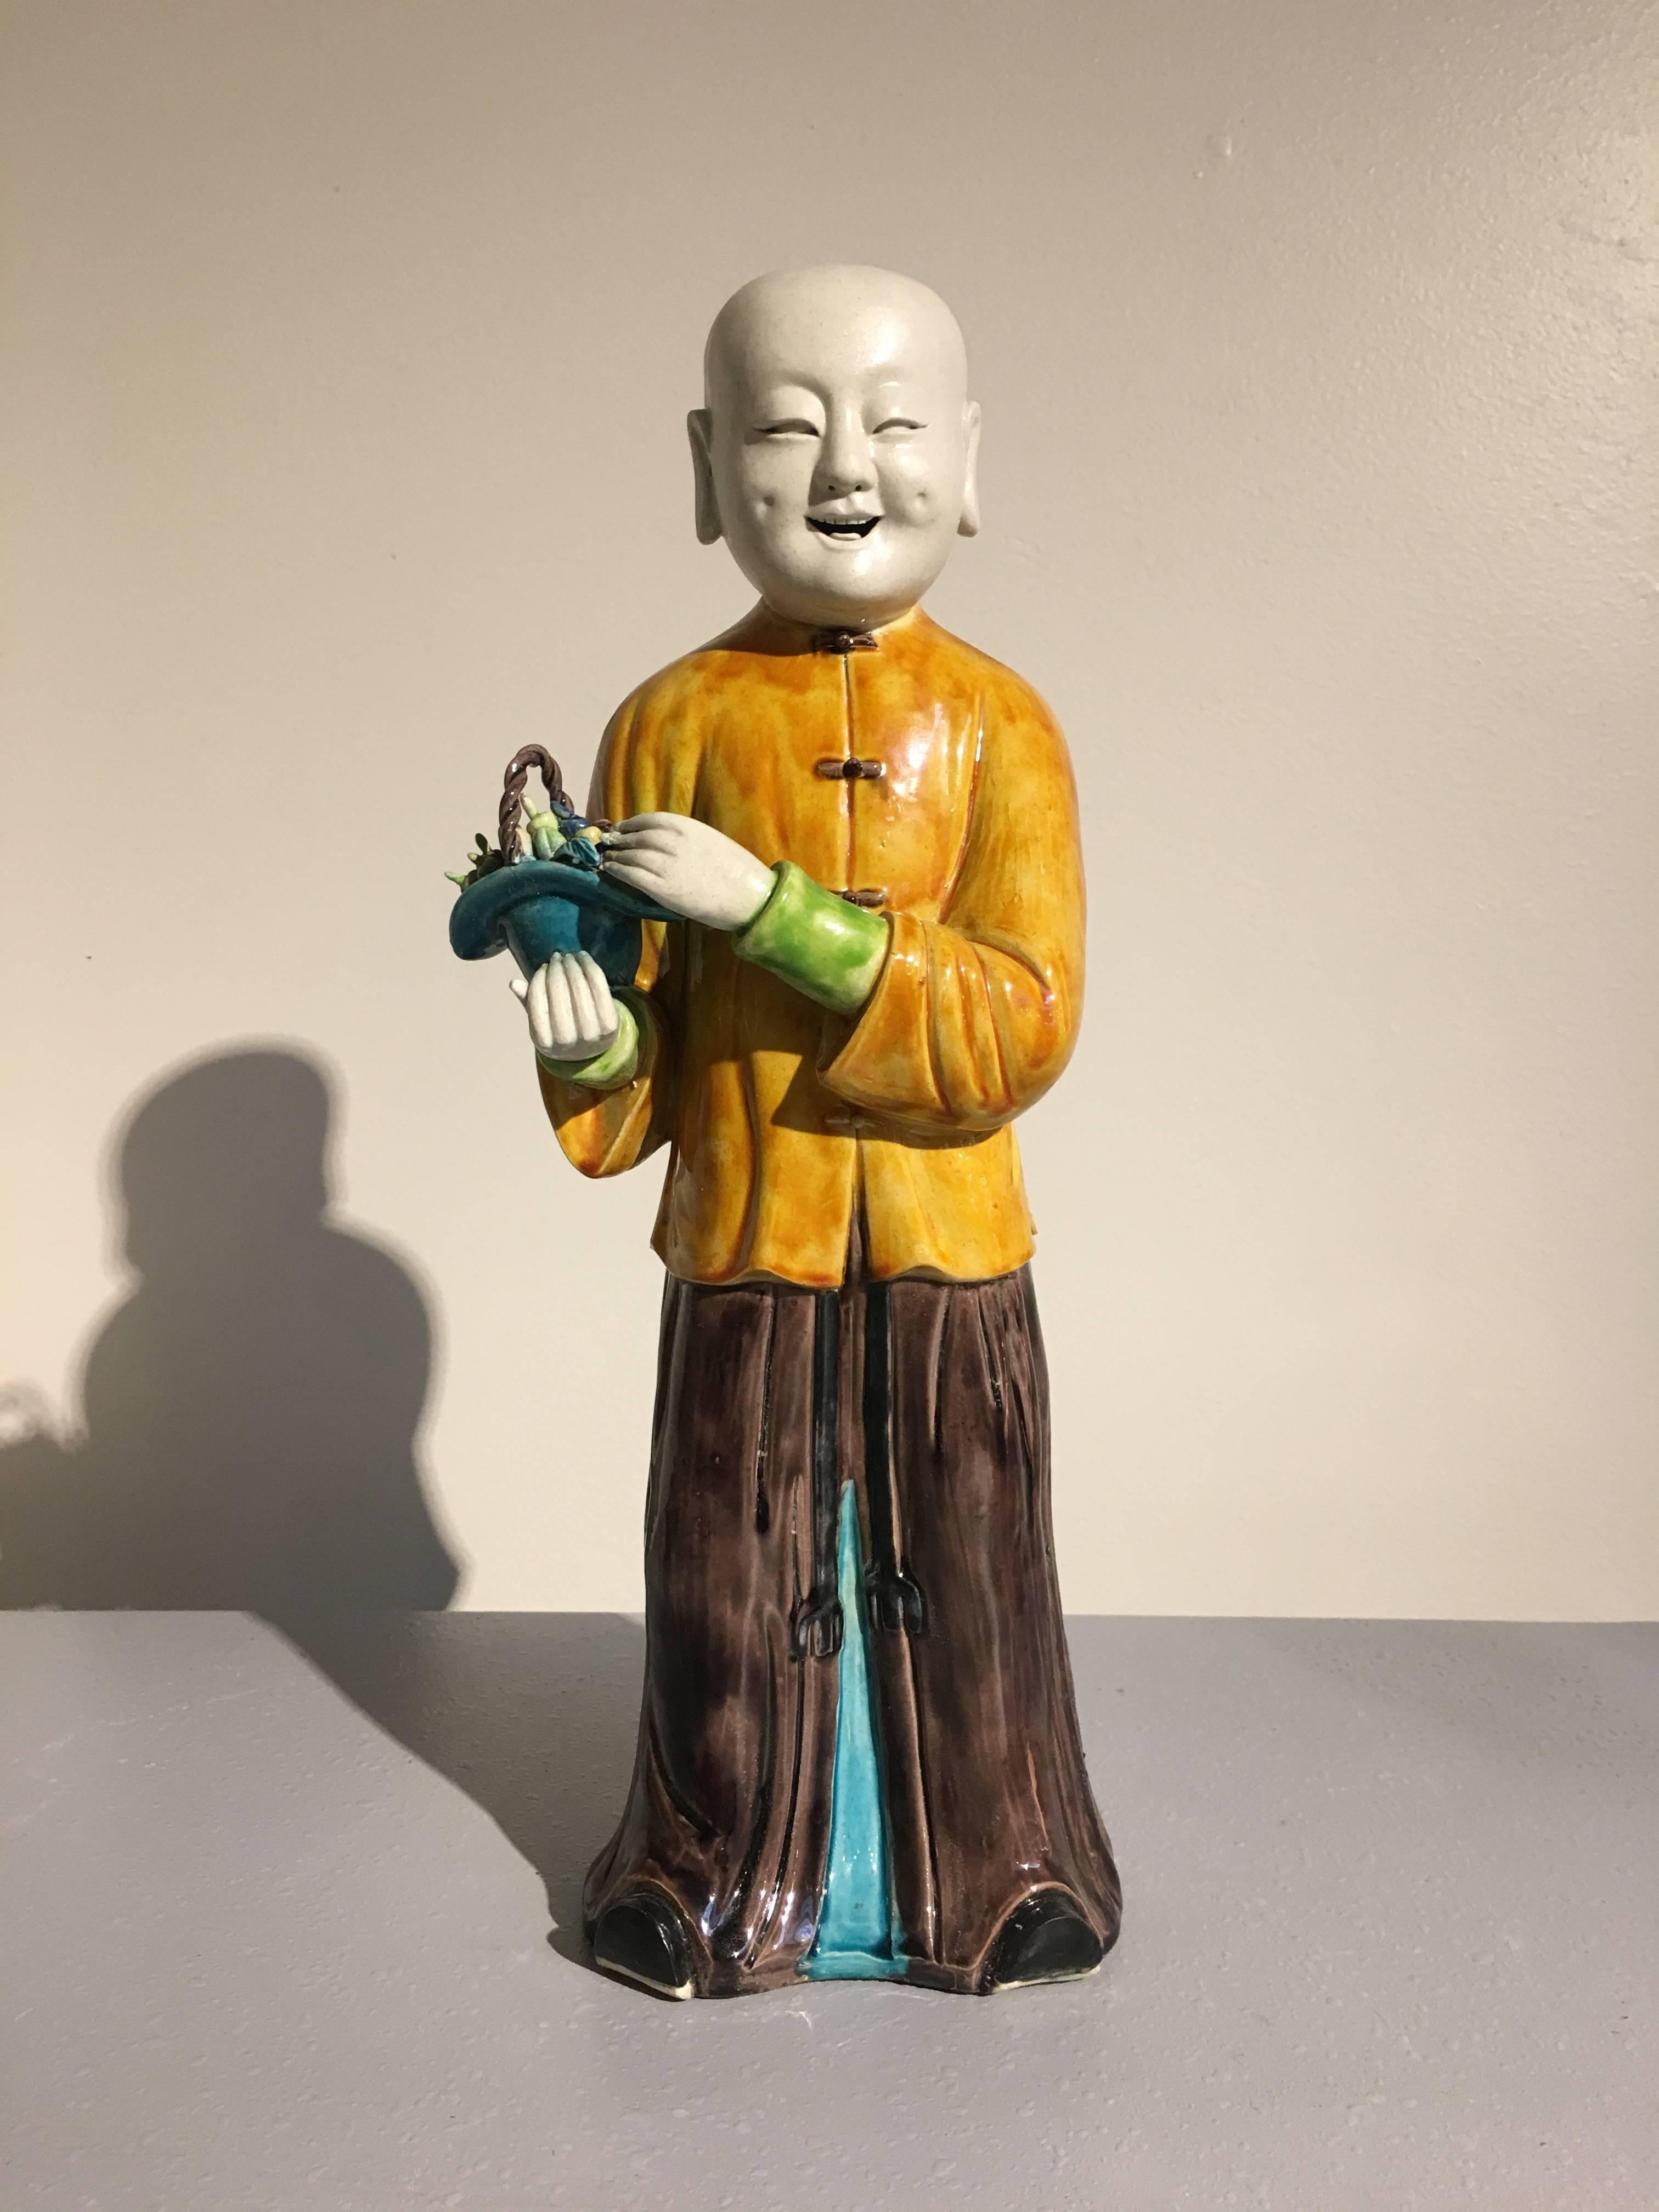 A large porcelain model of a boy, possibly the Taoist immortal Lan Caihe, Republic Period, early 20th century, China. 

The figure is portrayed standing, dressed in aubergine glazed robes, wearing a mustard glazed surcoat, and holding a turquoise